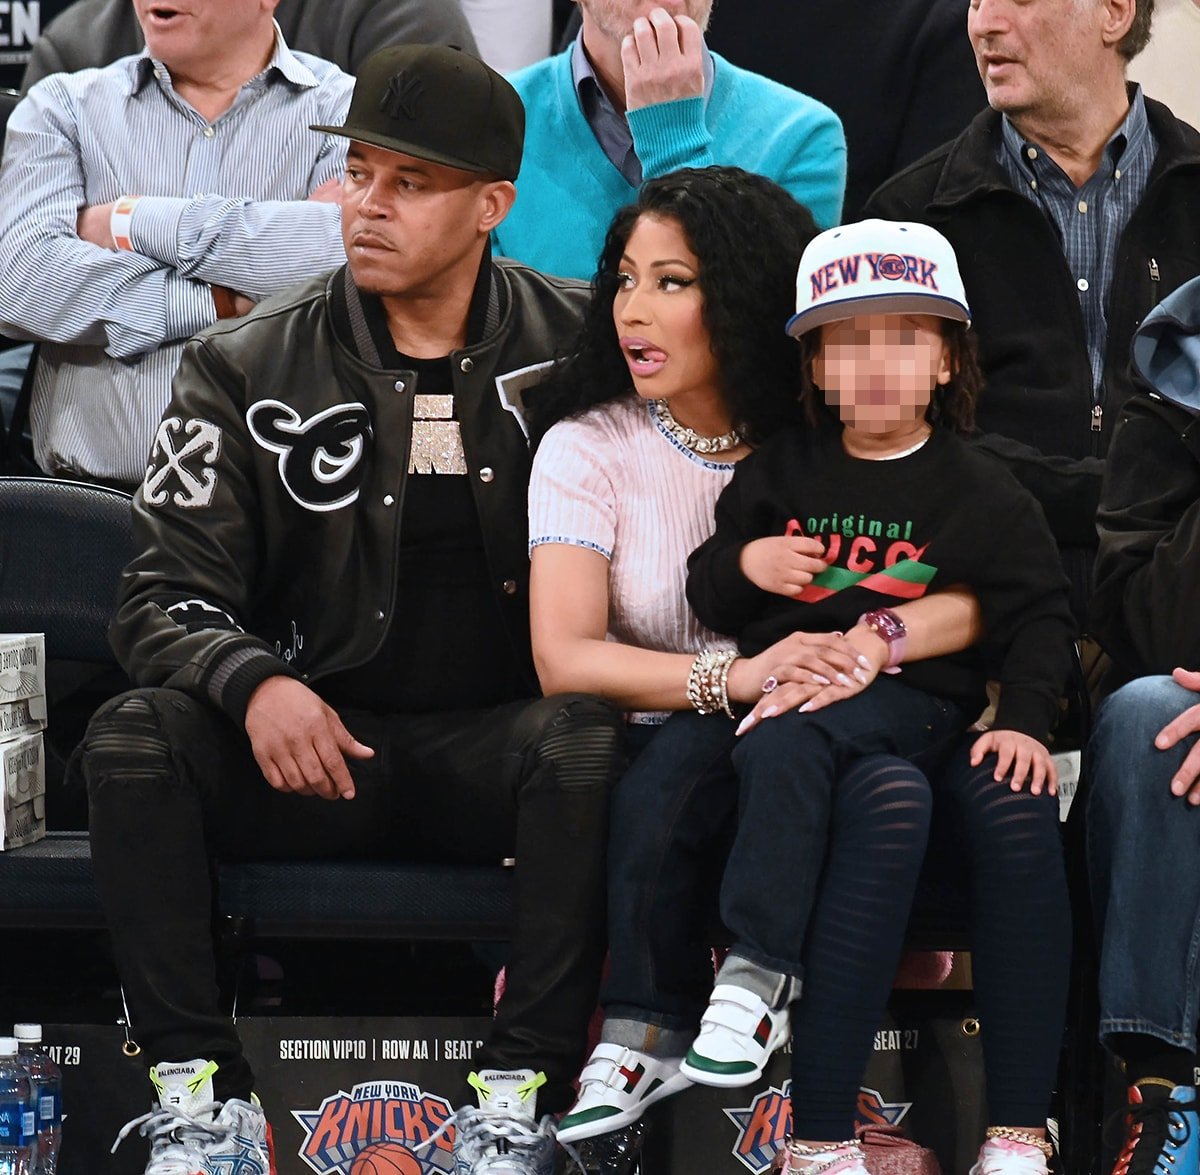 Nicki Minaj's husband Kenneth Petty looks cool in a black varsity jacket, ripped jeans, and Balenciaga sneakers, while their son Papa Bear dons a Gucci sweater with Gucci sneakers